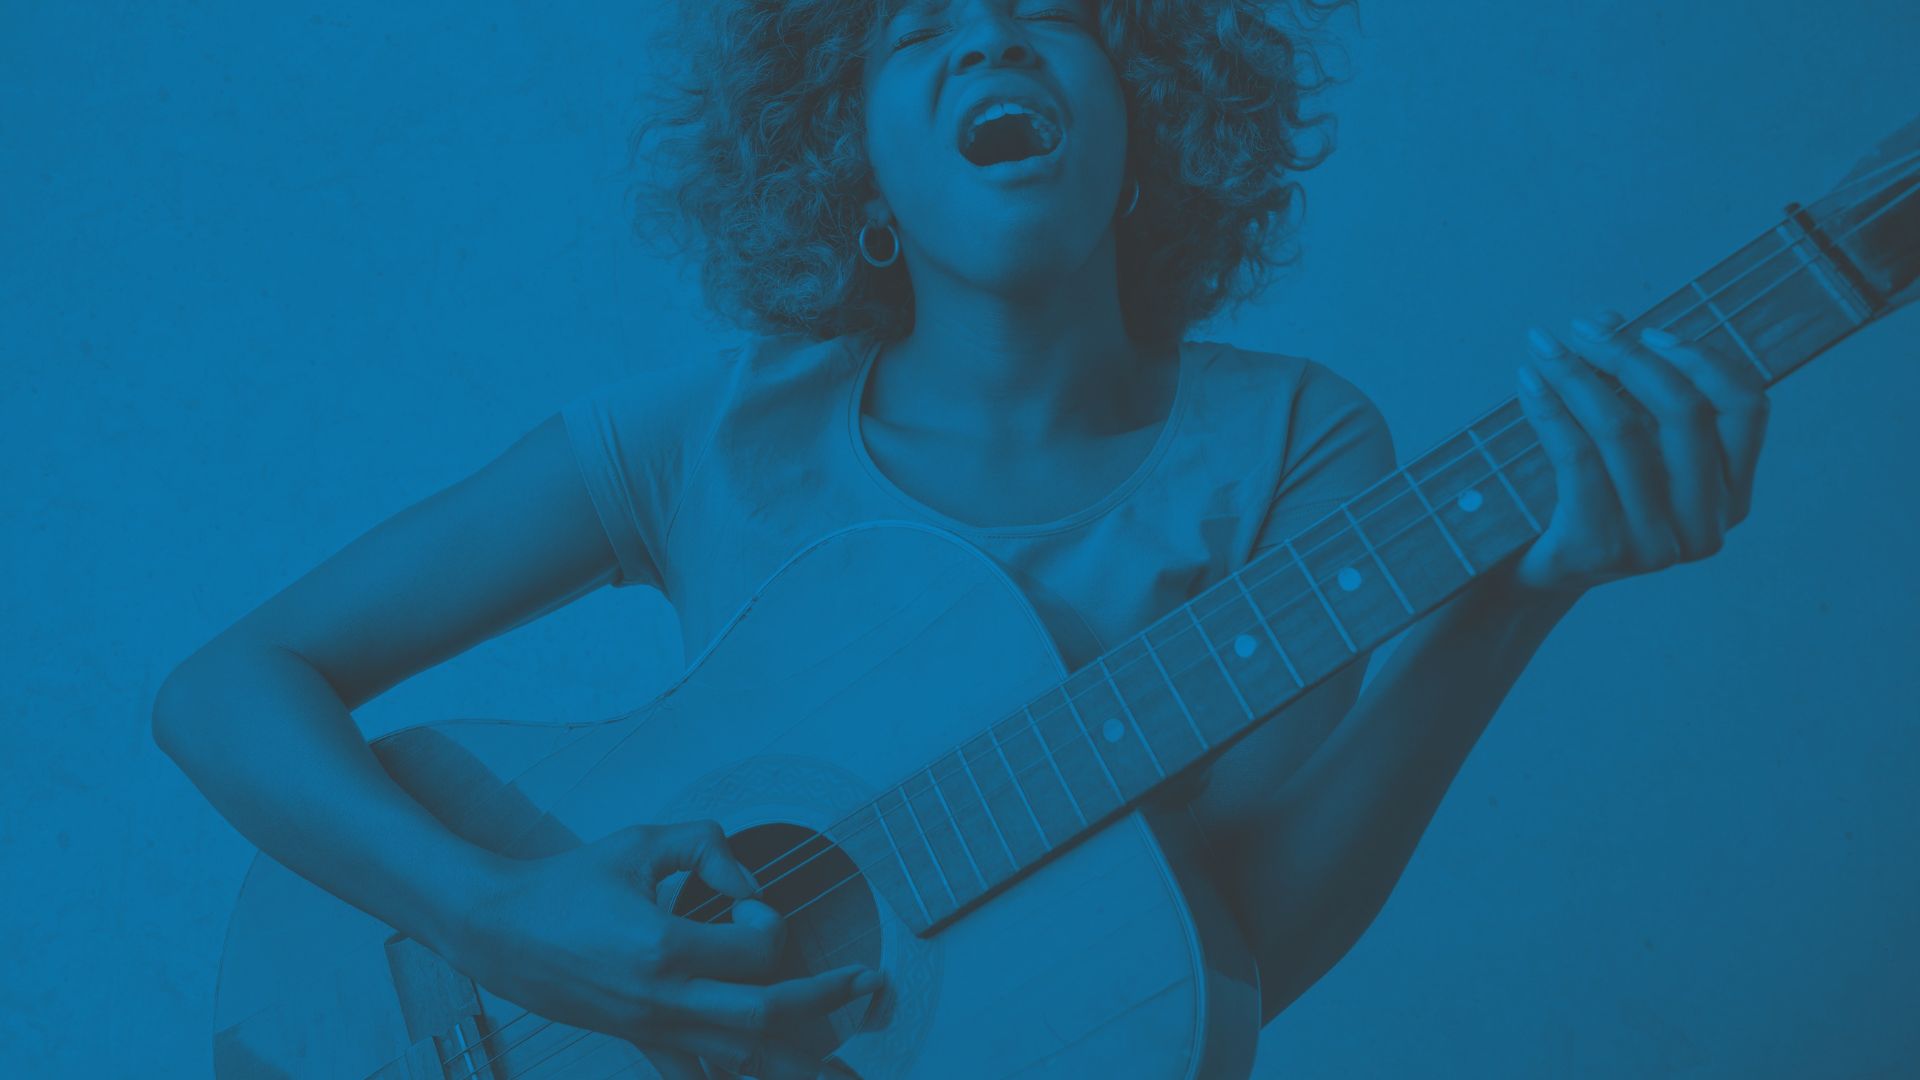 Image of a young woman singing with a guitar - The fund is to support access to music education and music-making opportunities for disadvantaged young people and communities.